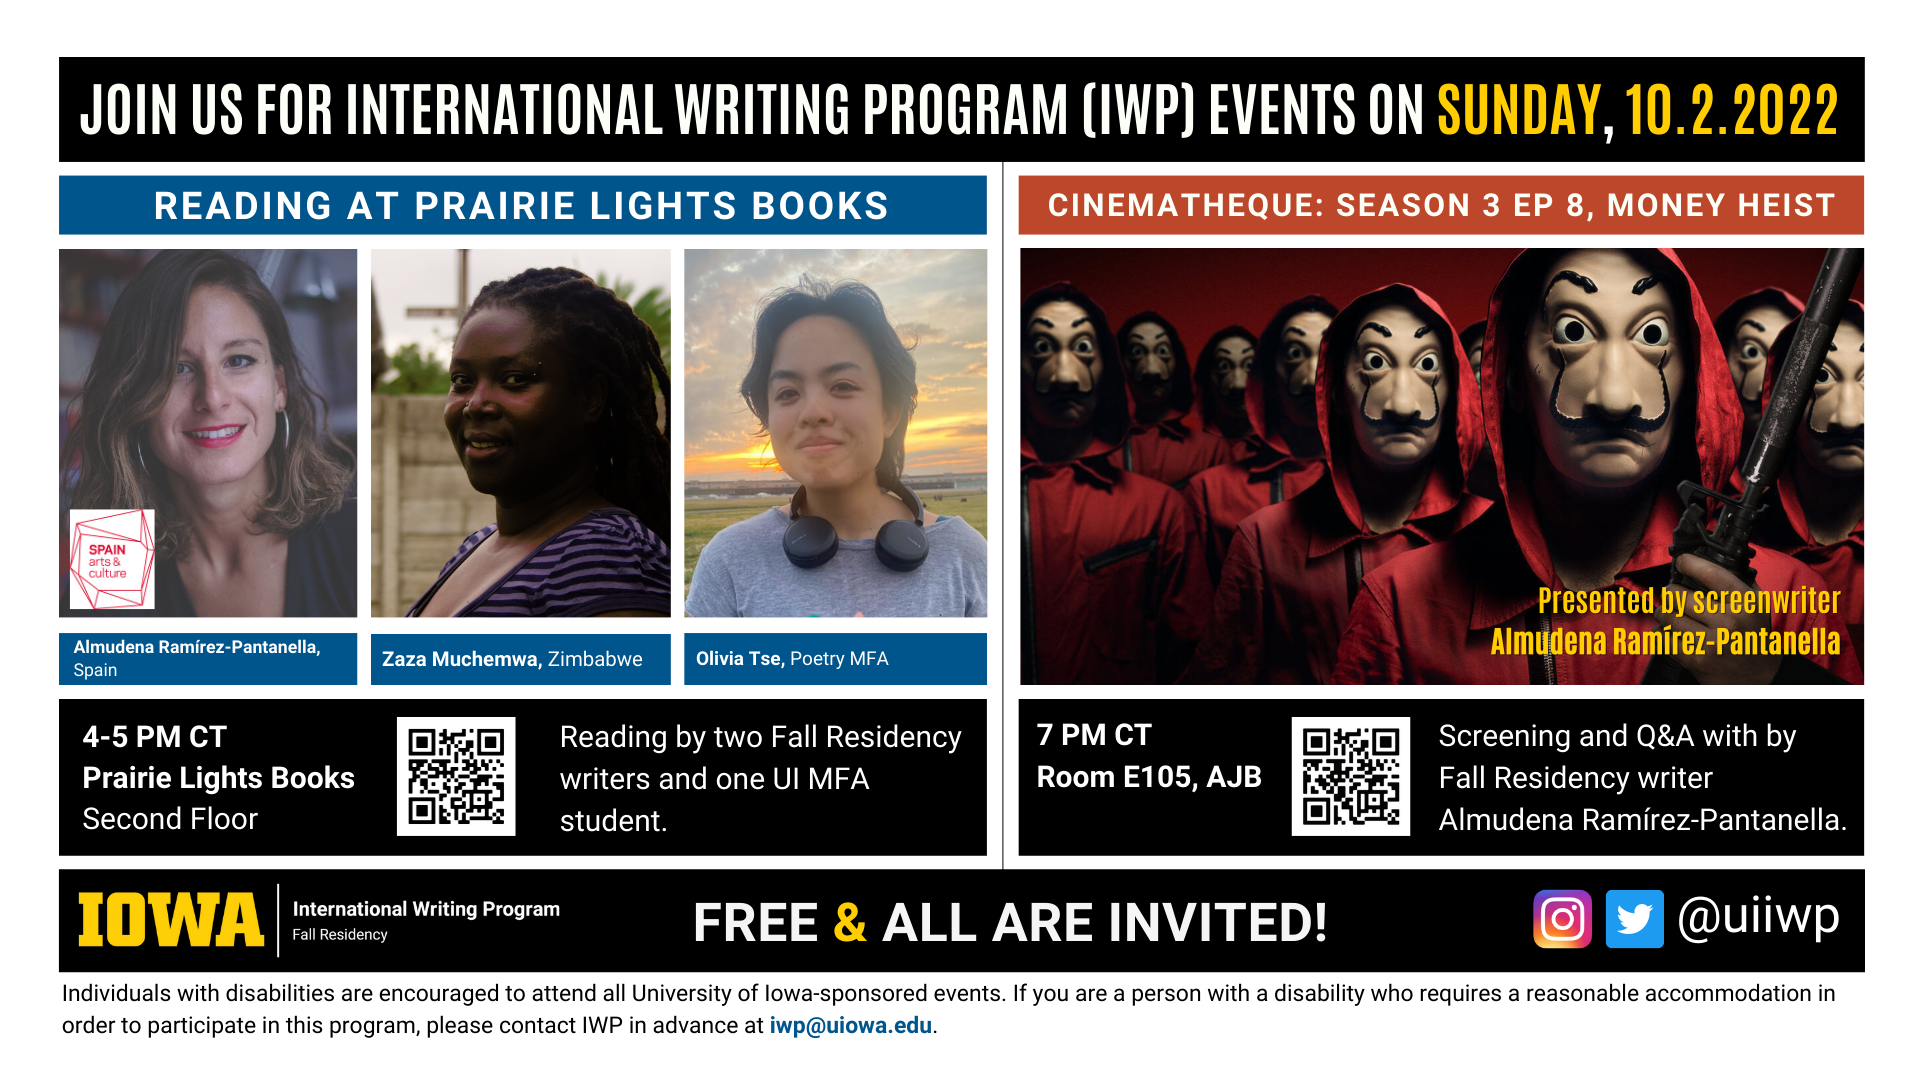 Sunday, 10/2 Image: An image with two halves, each advertising one event. The image as a whole is labeled "Join us for International Writing Program (IWP) Events on Sunday, 10.2.2022. The left half left of the image is labeled "Reading at Prairie Lights Books." There are portraits of three writers (named below) and the following text: "Almudena Ramírez-Pantanella, Spain. Zaza Muchemwa, Zimbabwe. Olivia Tse, Poetry MFA." 4-5 PM CT Prairie Lights Books, Second Floor. Reading by two Fall Residency writers and one UI MFA student." The right half of the image is labeled "Cinematheque Screening: Season 3, Ep 8, Money Heist. Below that heading there is a promotional image for the series Money Heist, featuring menacing people in masks and red robes. The following text appears below: "7 PM CT, Room E105 AJB. Screening followed by brief Q&A, hosted by Fall Residency writer Almudena Ramírez-Pantanella." Below that text there are the IWP Fall Residency logo, the Instagram and Twitter handle @uiiwp, and a note that the event is “Free & All Are Invited.” The following text is at the bottom of the image: "Individuals with disabilities are encouraged to attend all University of Iowa-sponsored events. If you are a person with a disability who requires a reasonable accommodation in order to participate in this program, please contact IWP in advance at iwp@uiowa.edu."